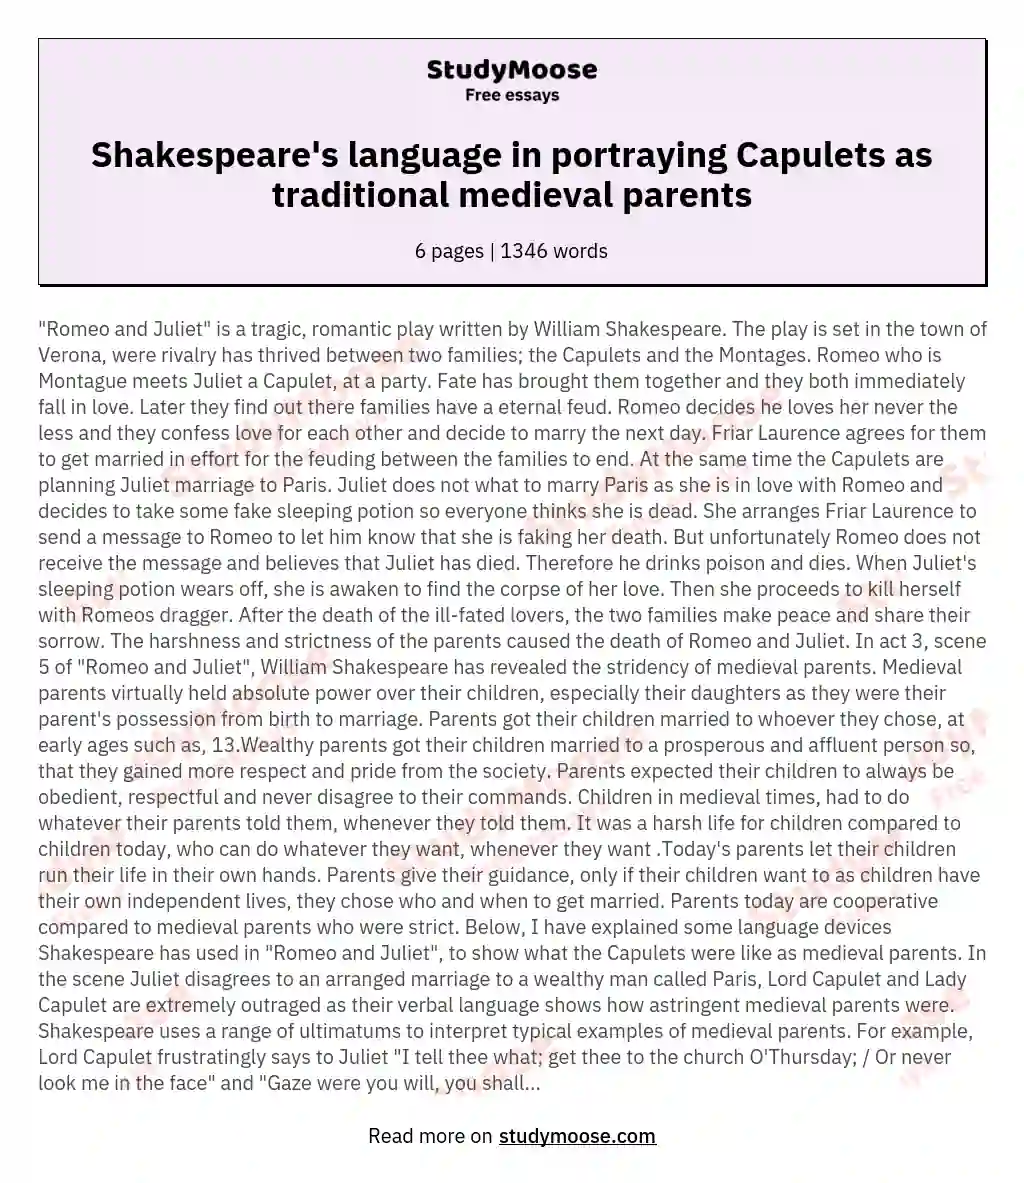 Shakespeare's language in portraying Capulets as traditional medieval parents essay